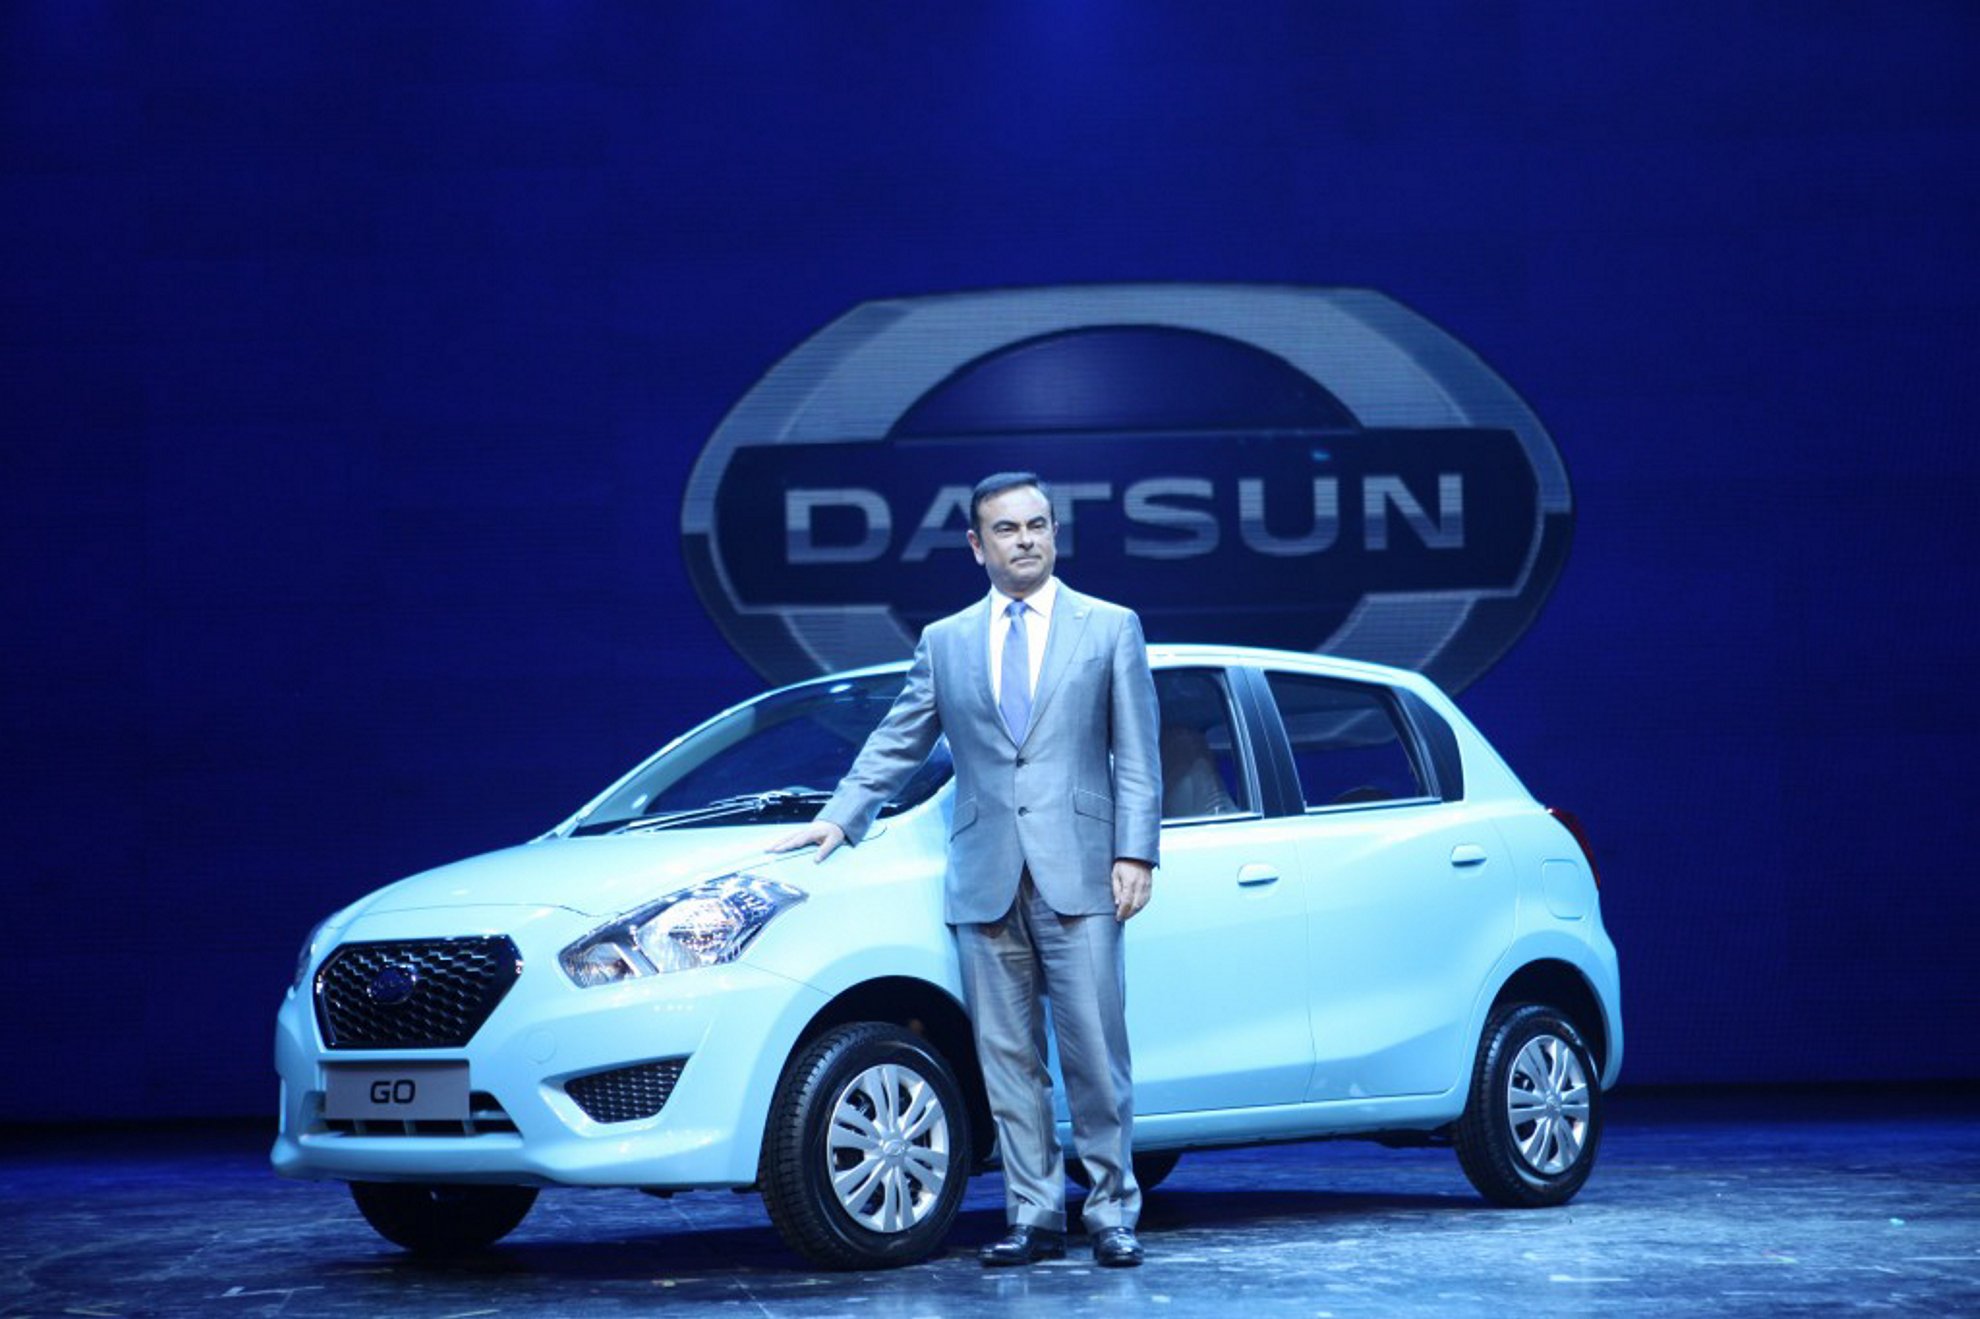 DATSUN INDIA ON THE RISE